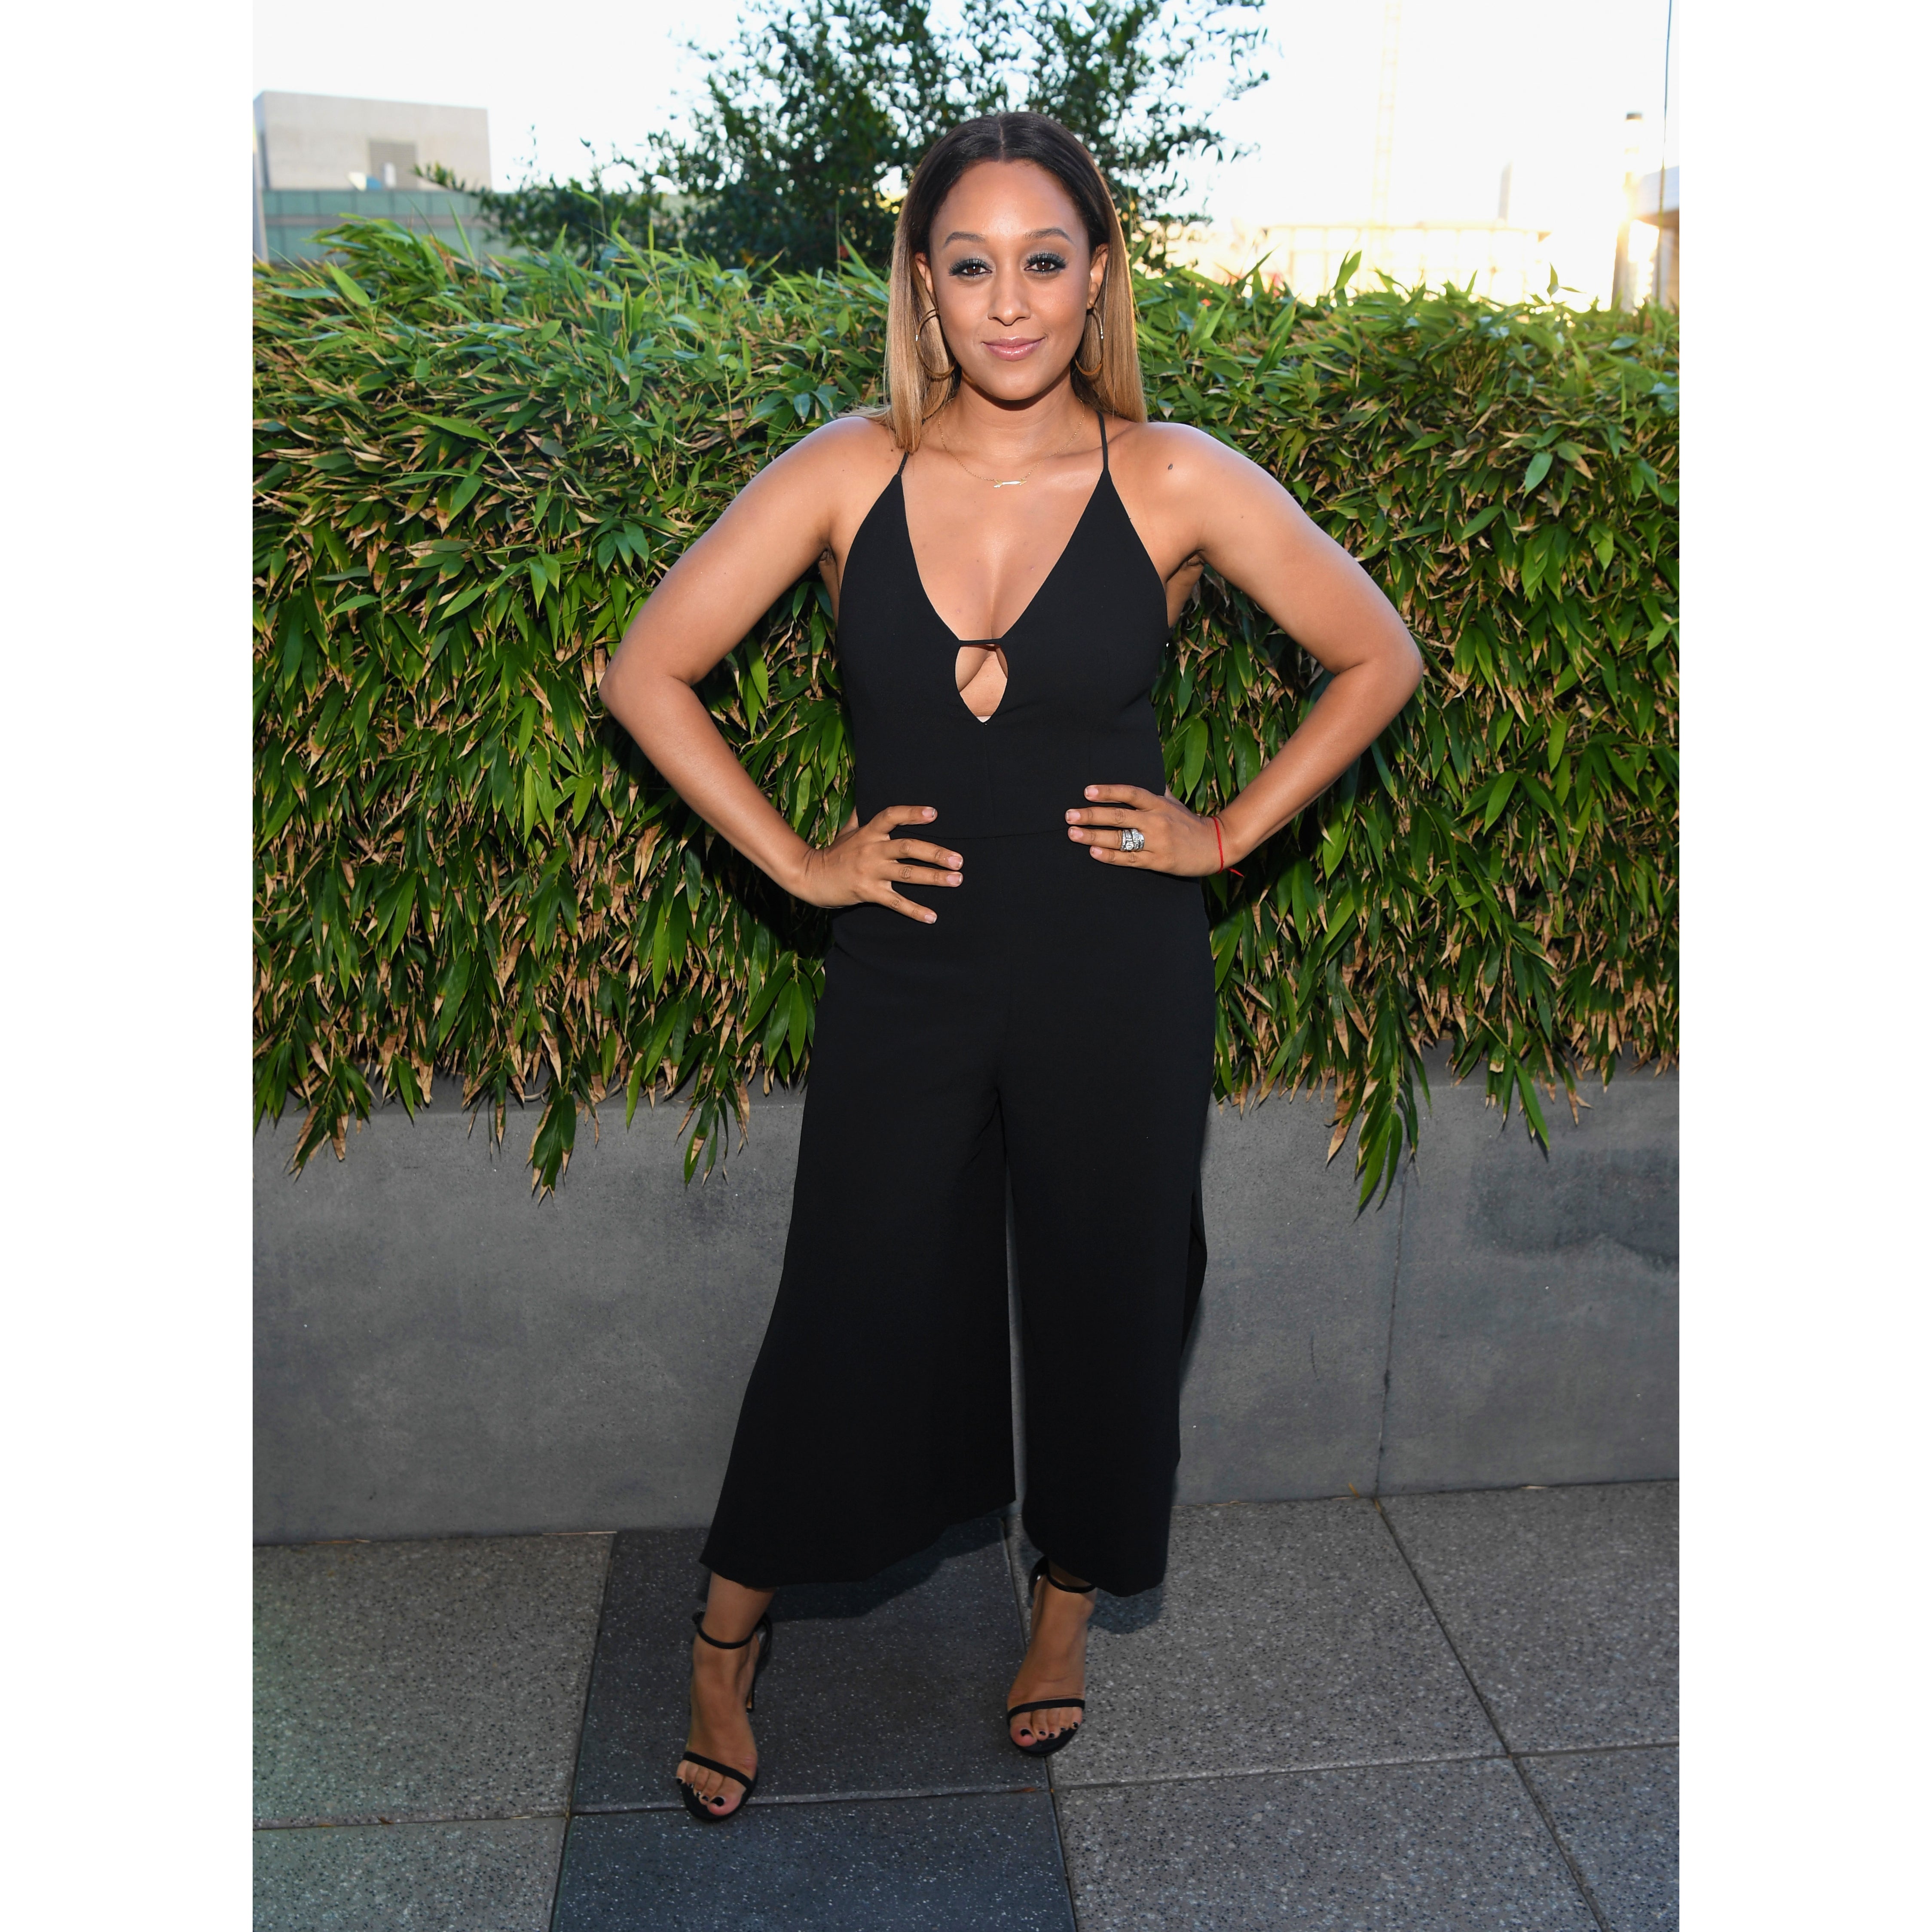 Paula Patton, Tia Mowry & More Gave Us Major Style Moments This Week
